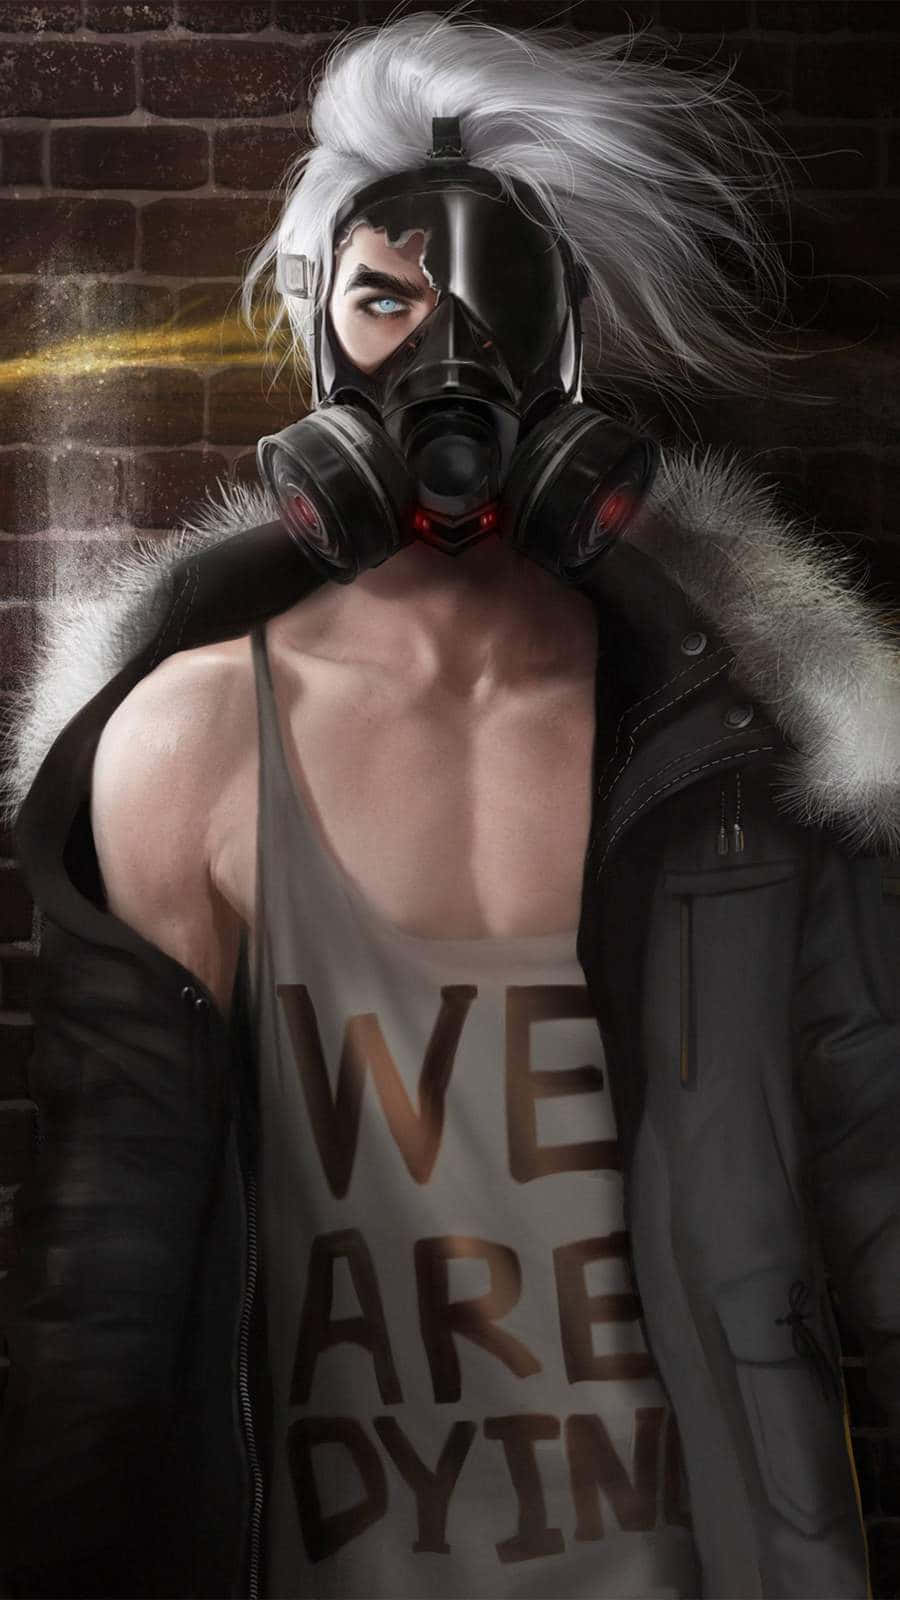 Intense Portrait Of A Muscular Young Man Wearing A Gas Mask